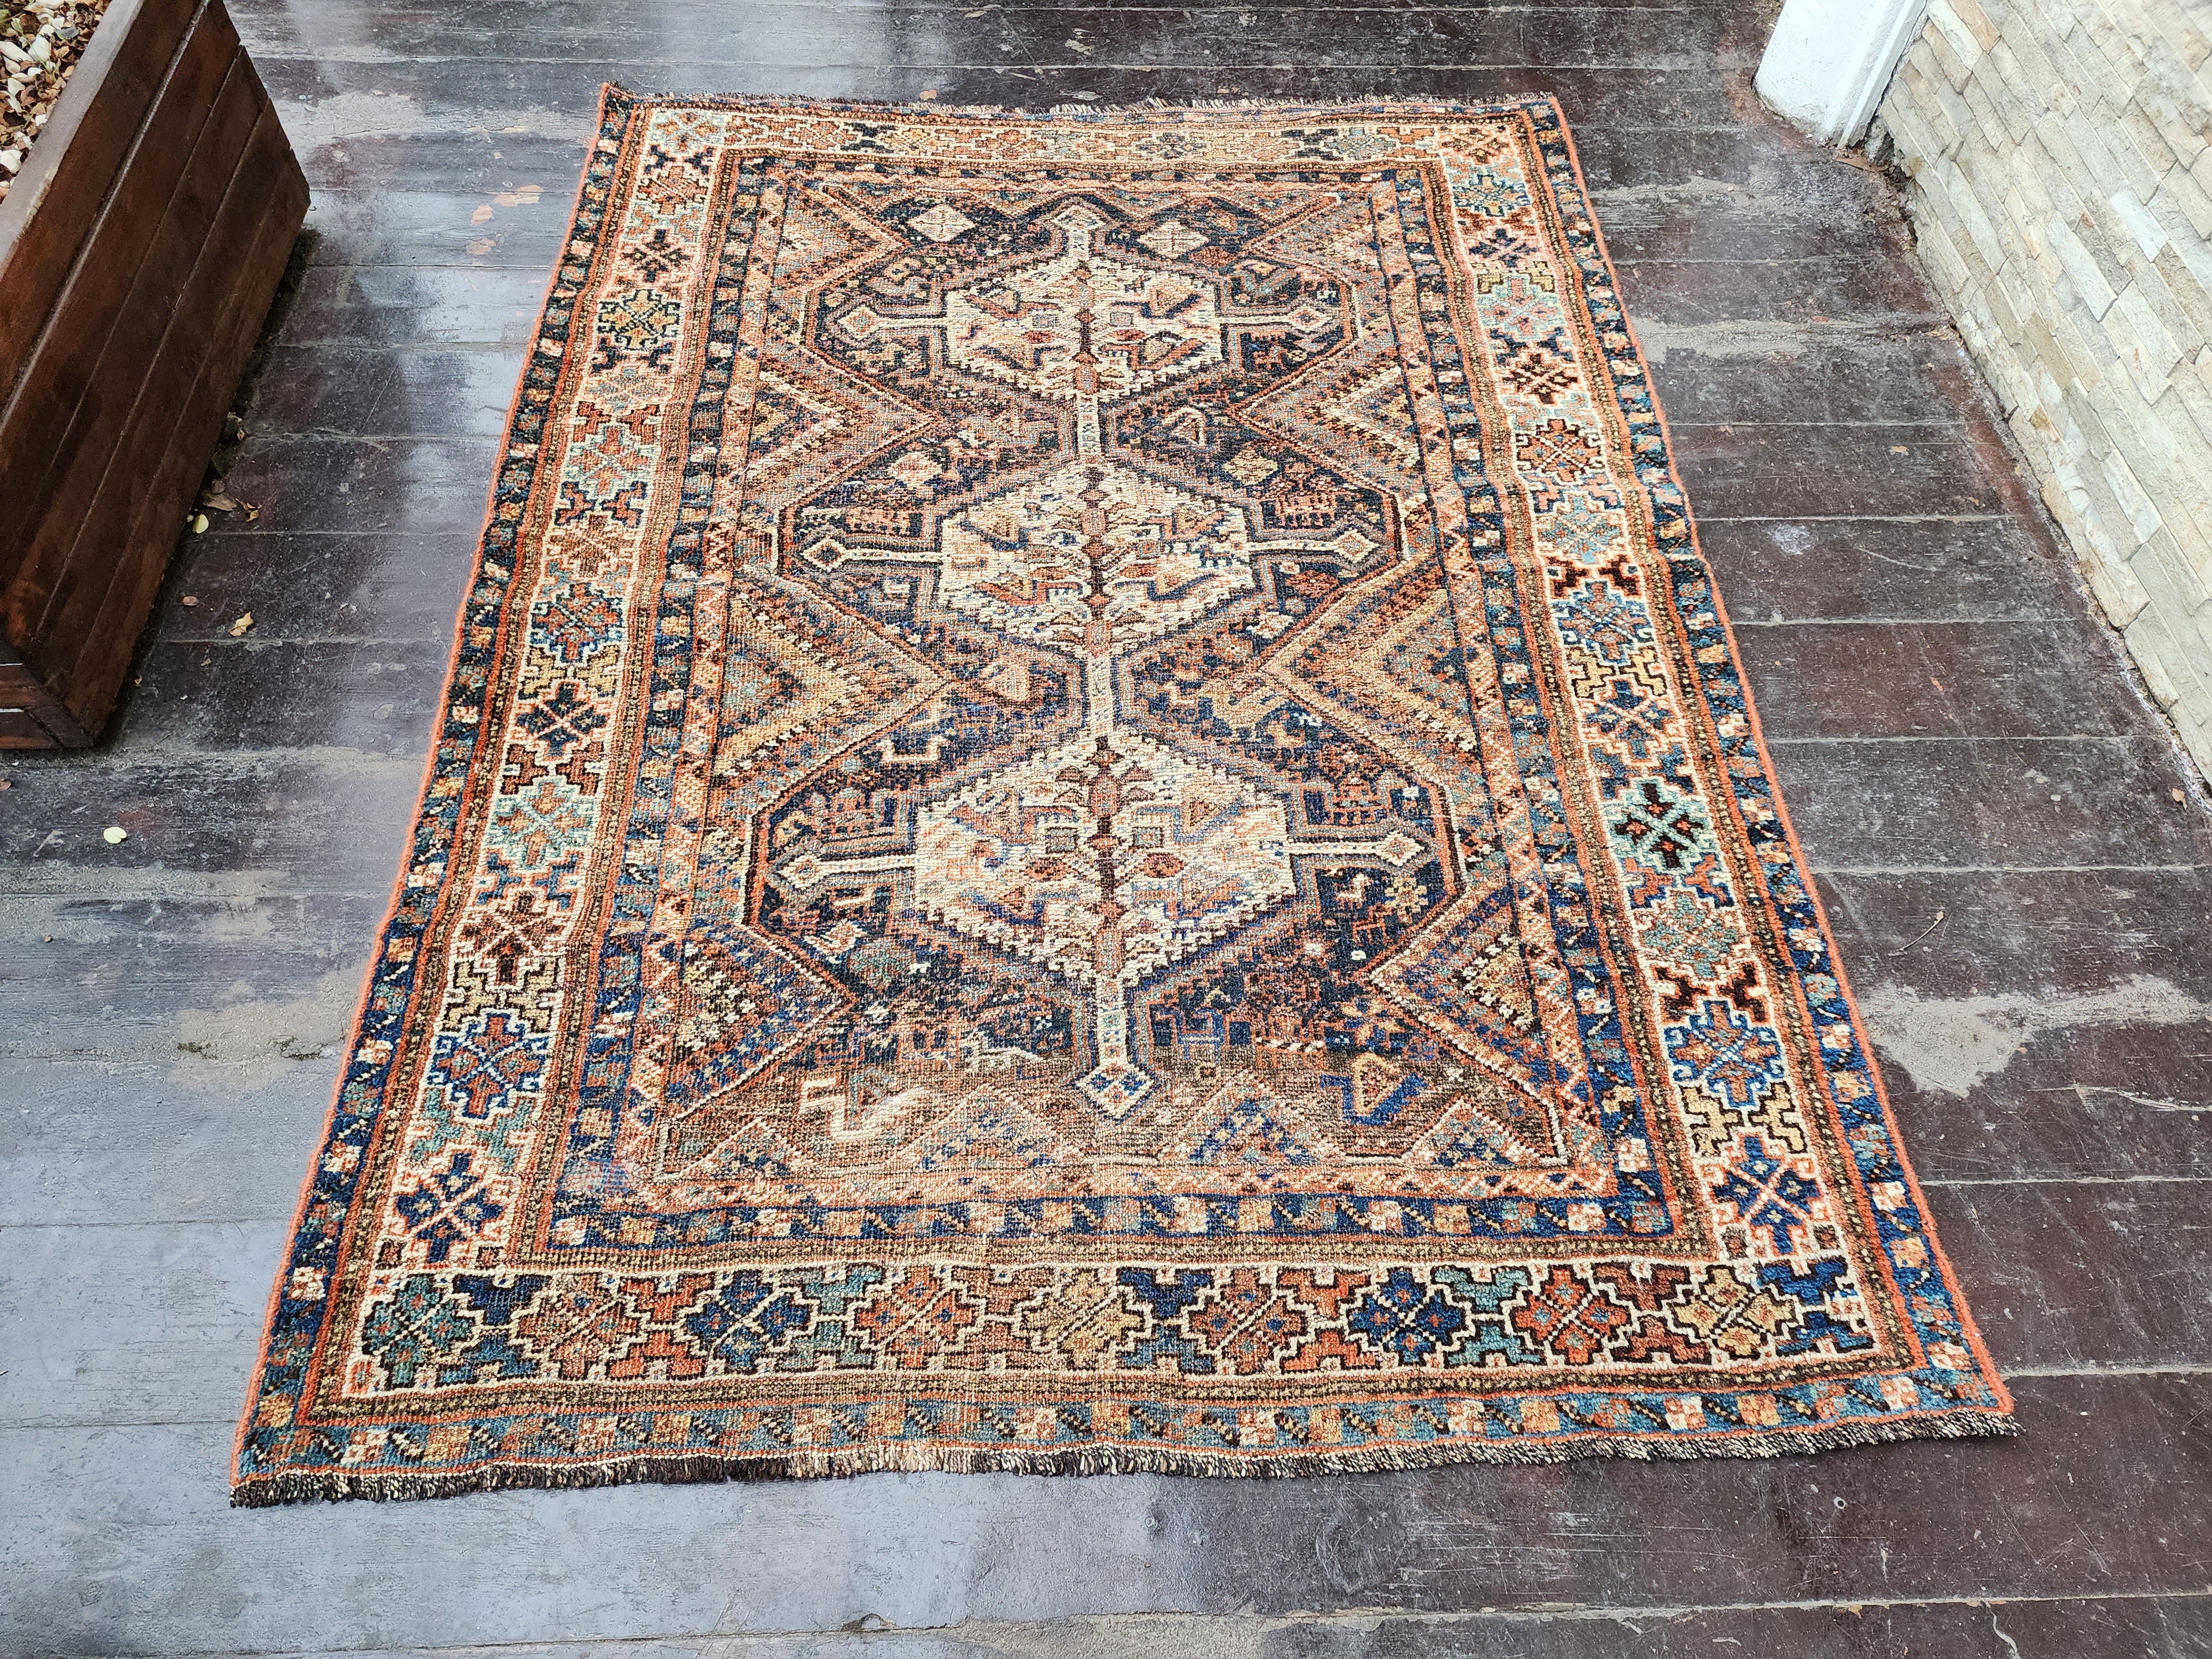 Blue and Brown Antique Persian Area Rug 5 x 4 ft Vintage Turkish Tribal Natural Wool Rug, Recycled Oriental Design Rustic Bohemian Floor Rug